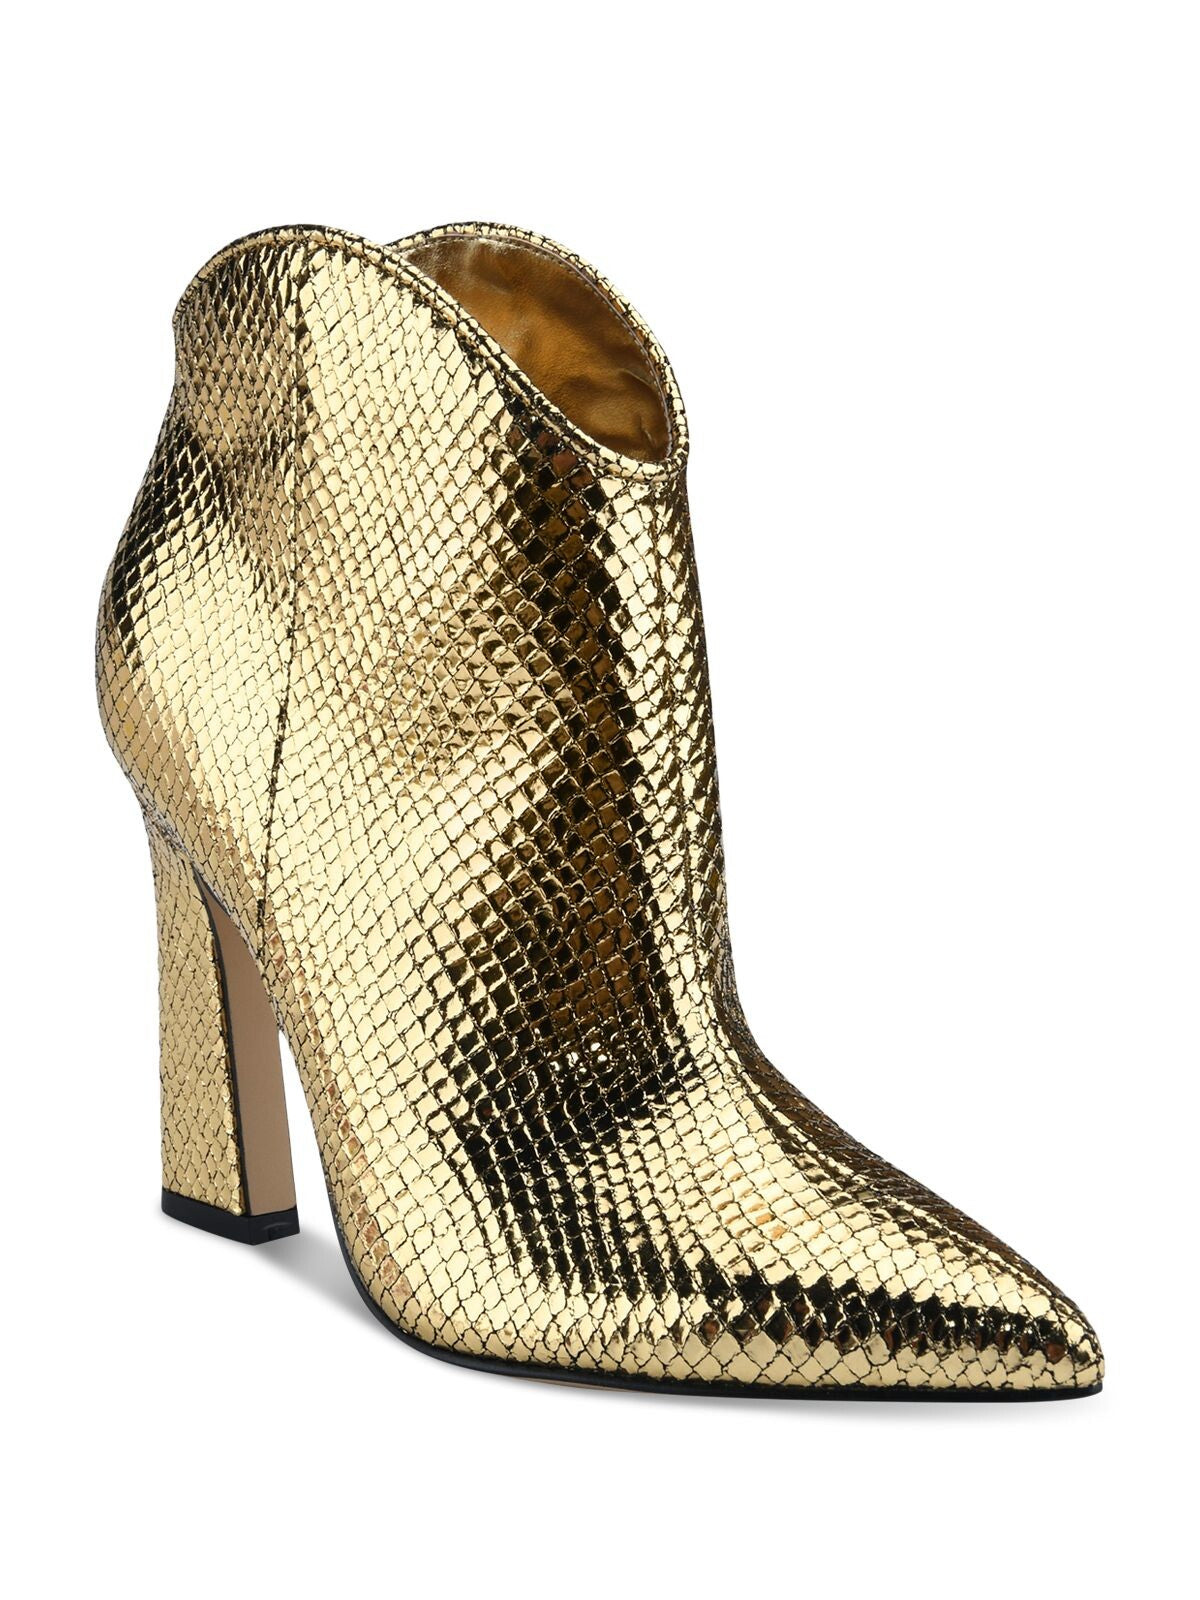 MARC FISHER LTD Womens Gold Snake Western Comfort Masina Pointed Toe Sculpted Heel Leather Booties 6.5 M